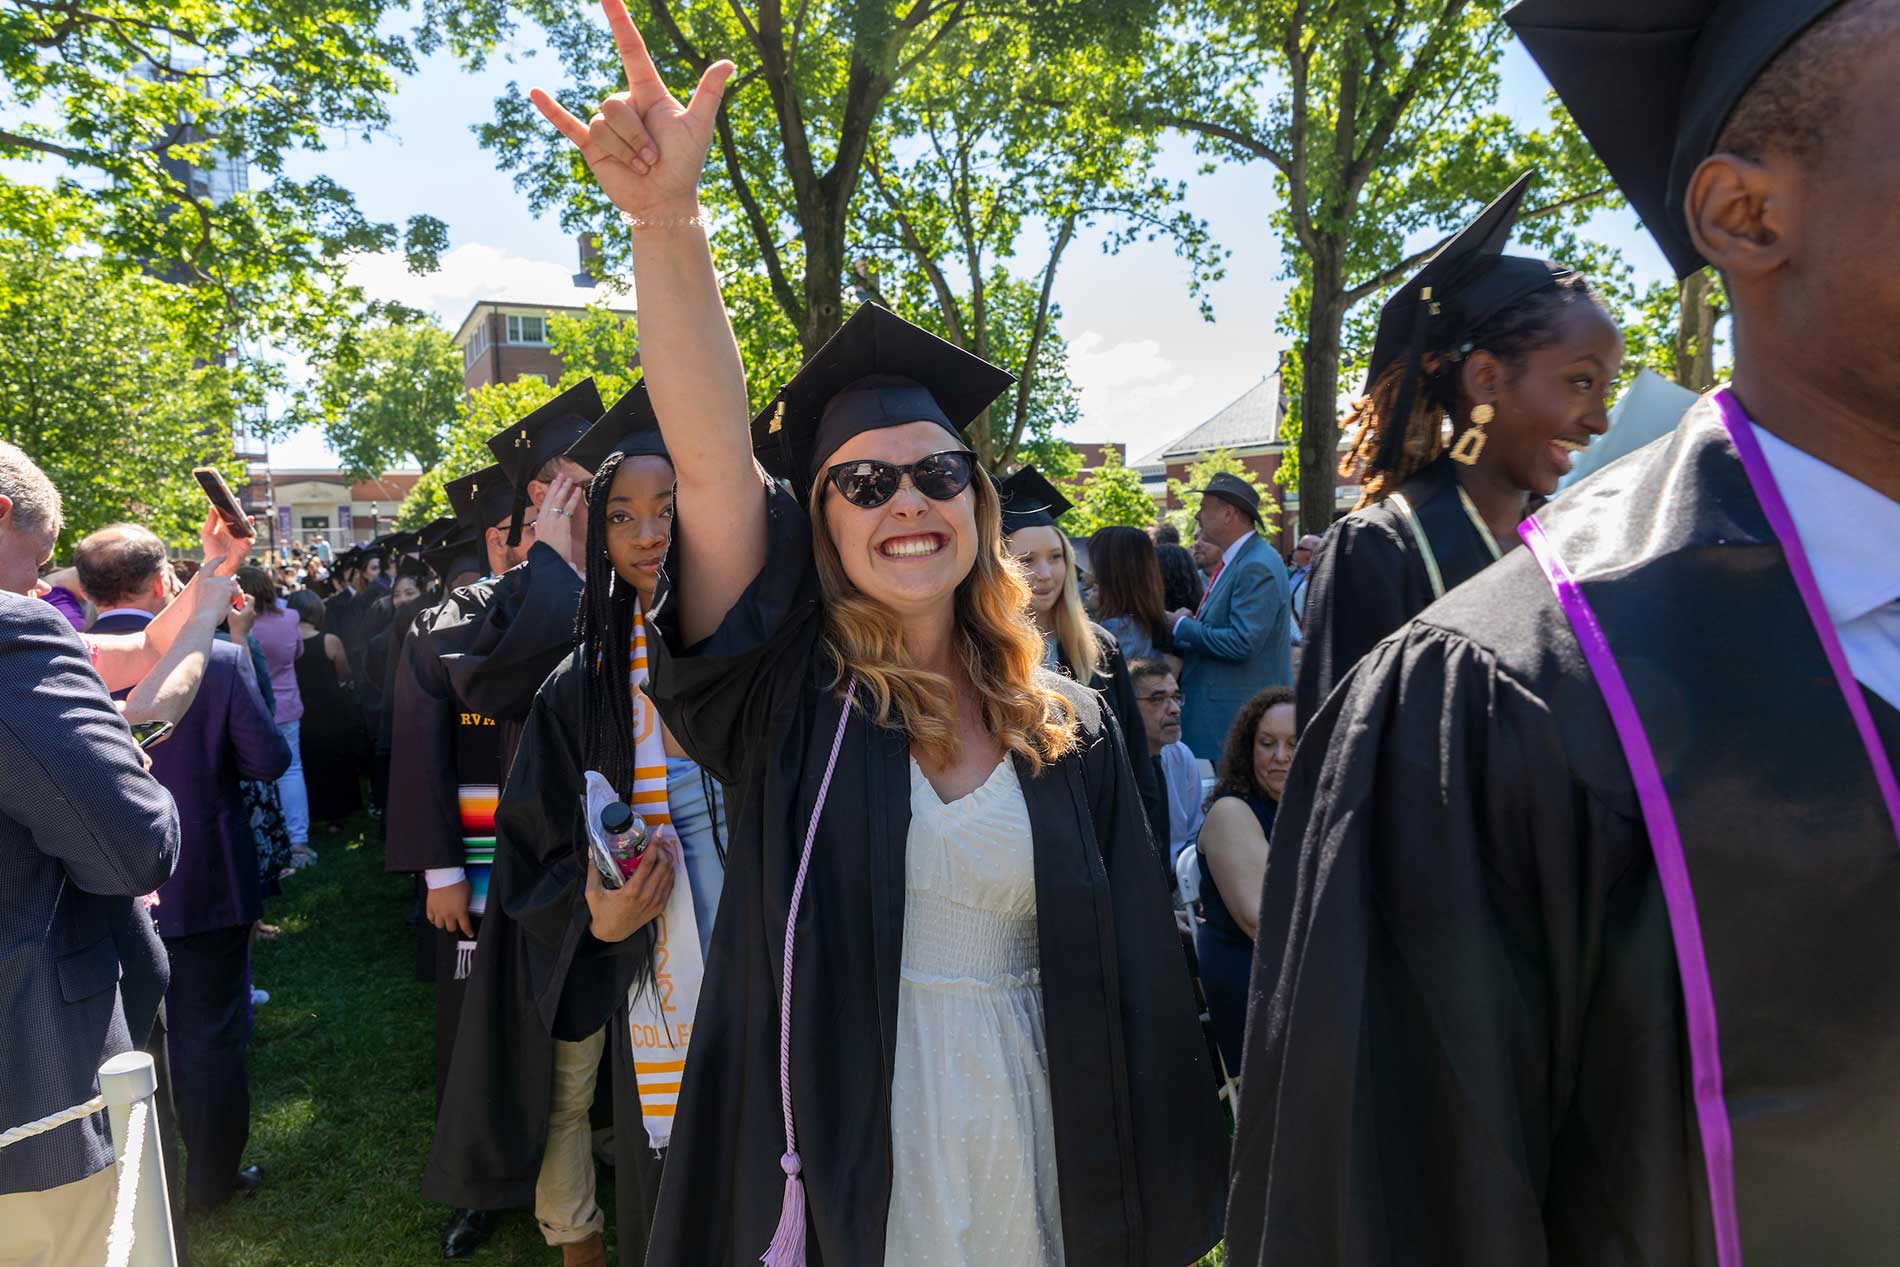 A female student, walking in line with other robed graduates, raises her fist in celebration.